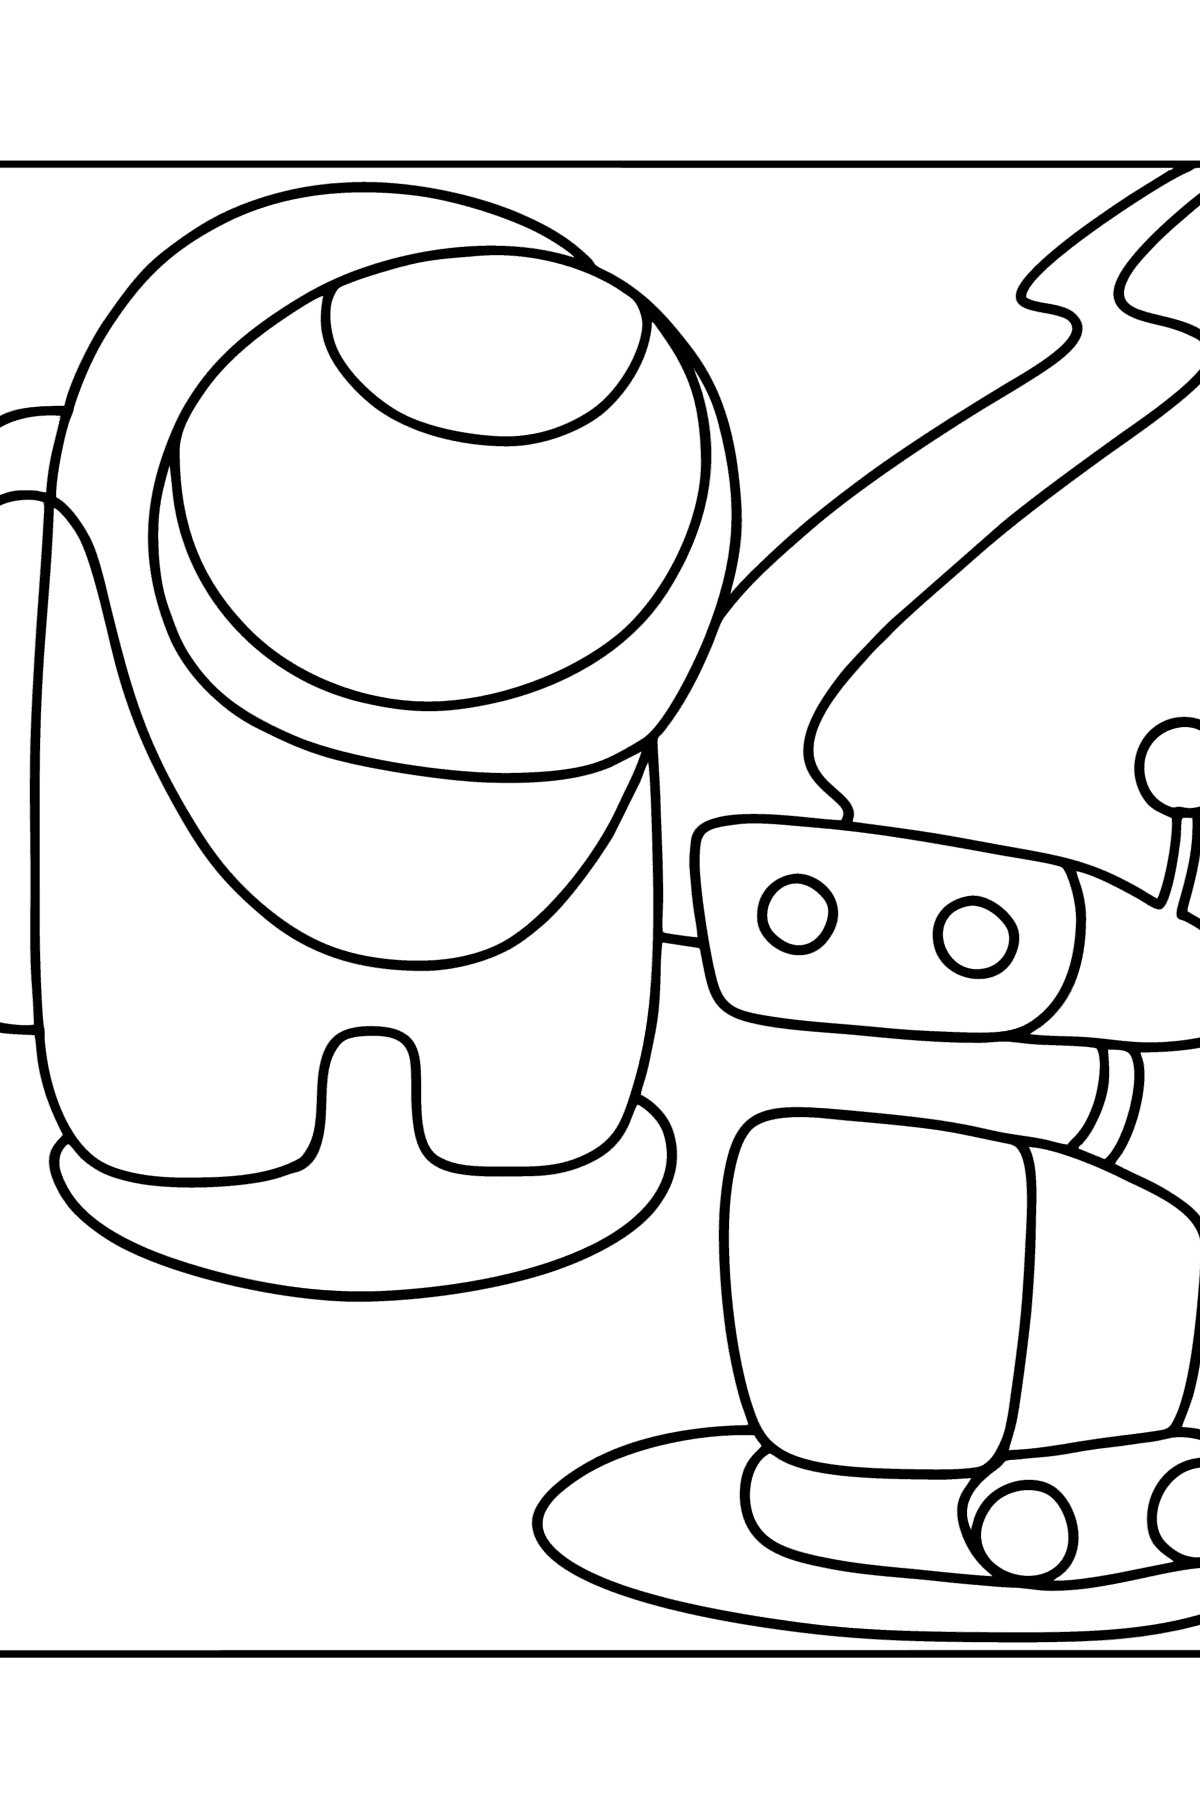 Coloring page astronaut and pet robot Among Us ♥ Online and Print